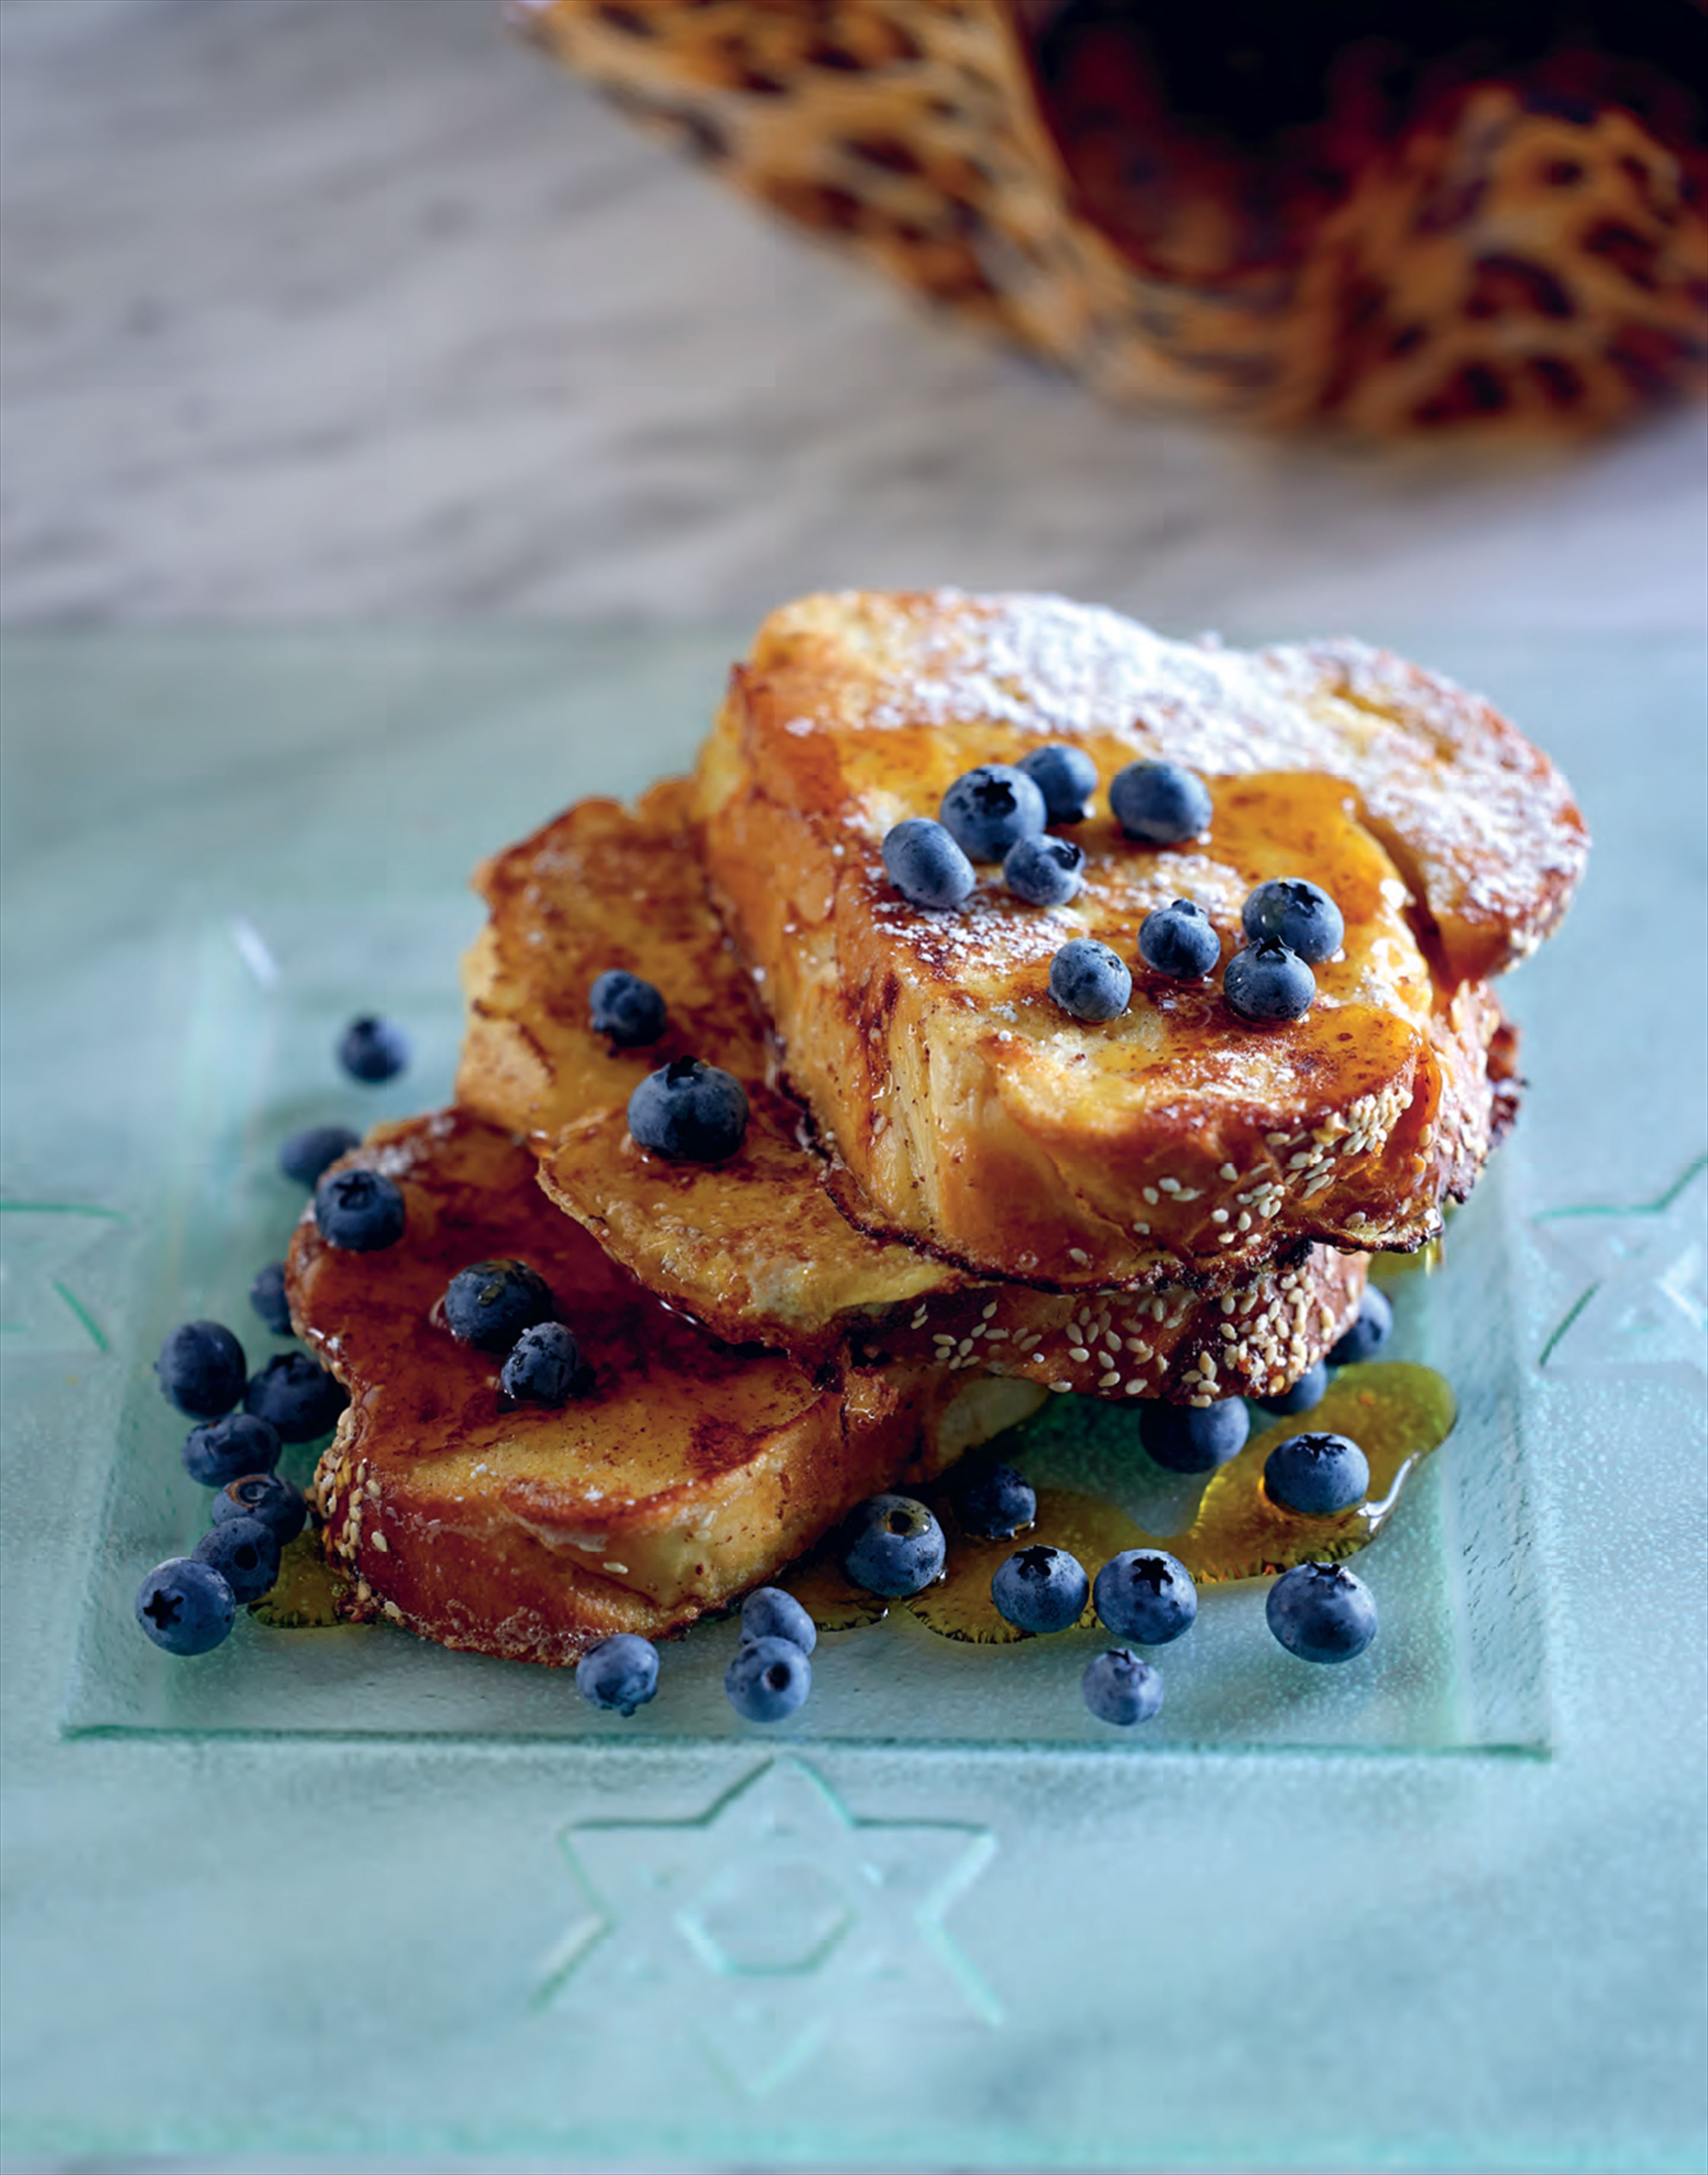 French toast challah with maple syrup and blueberries